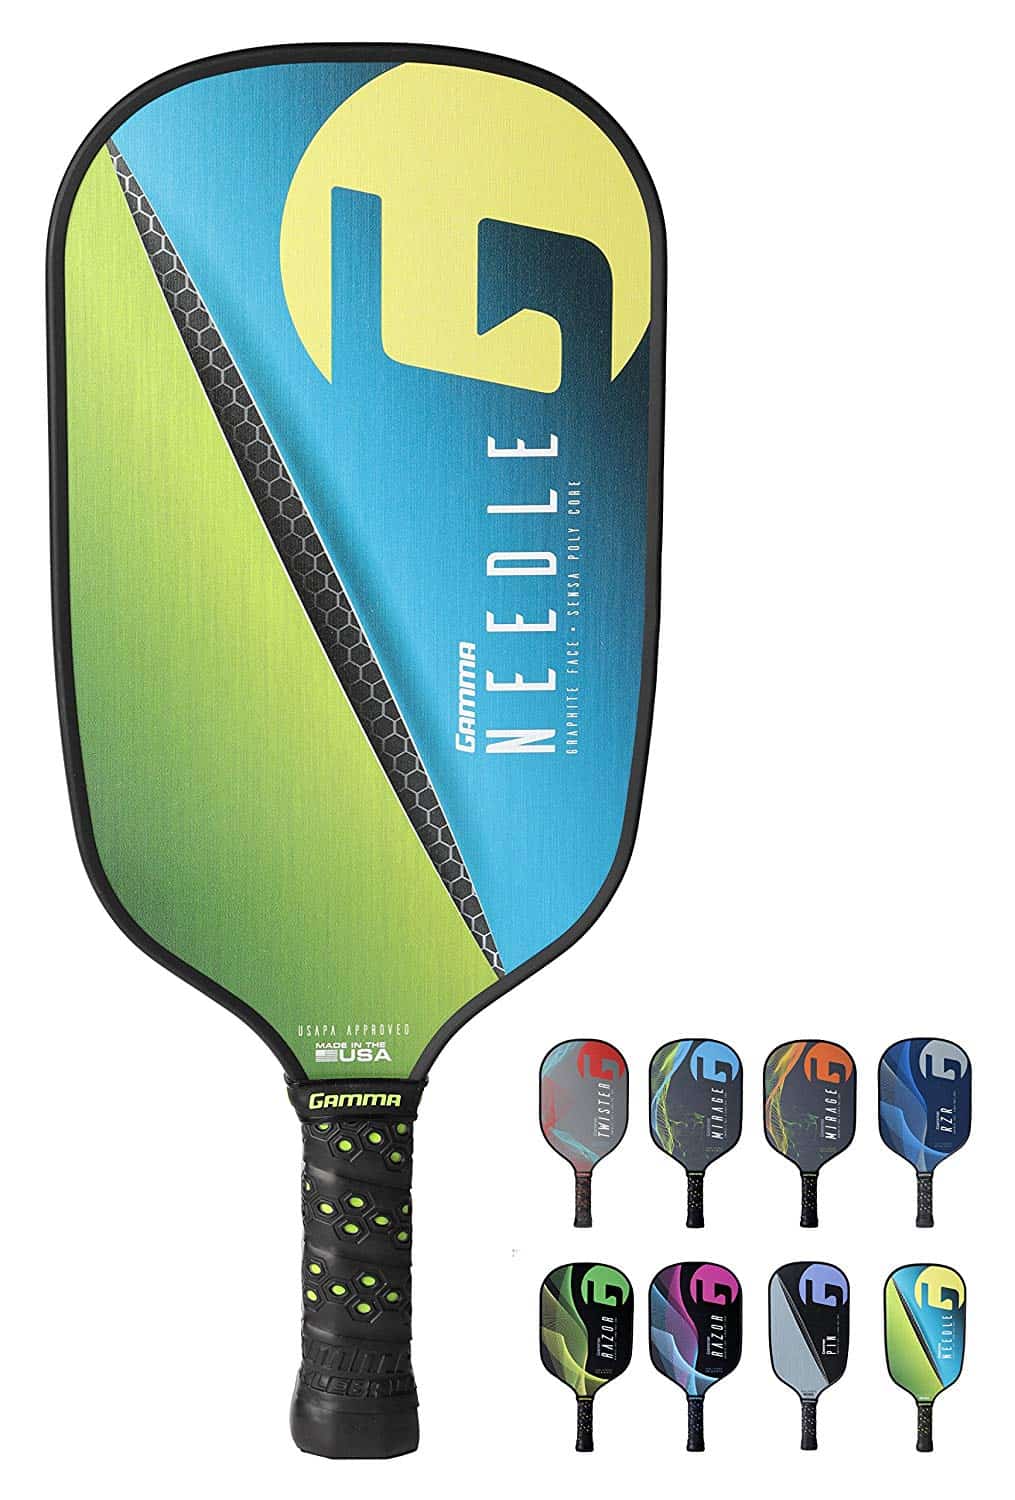 10 Best Pickleball Paddle Serve, Hit, and Volley in 2018 Bestazy